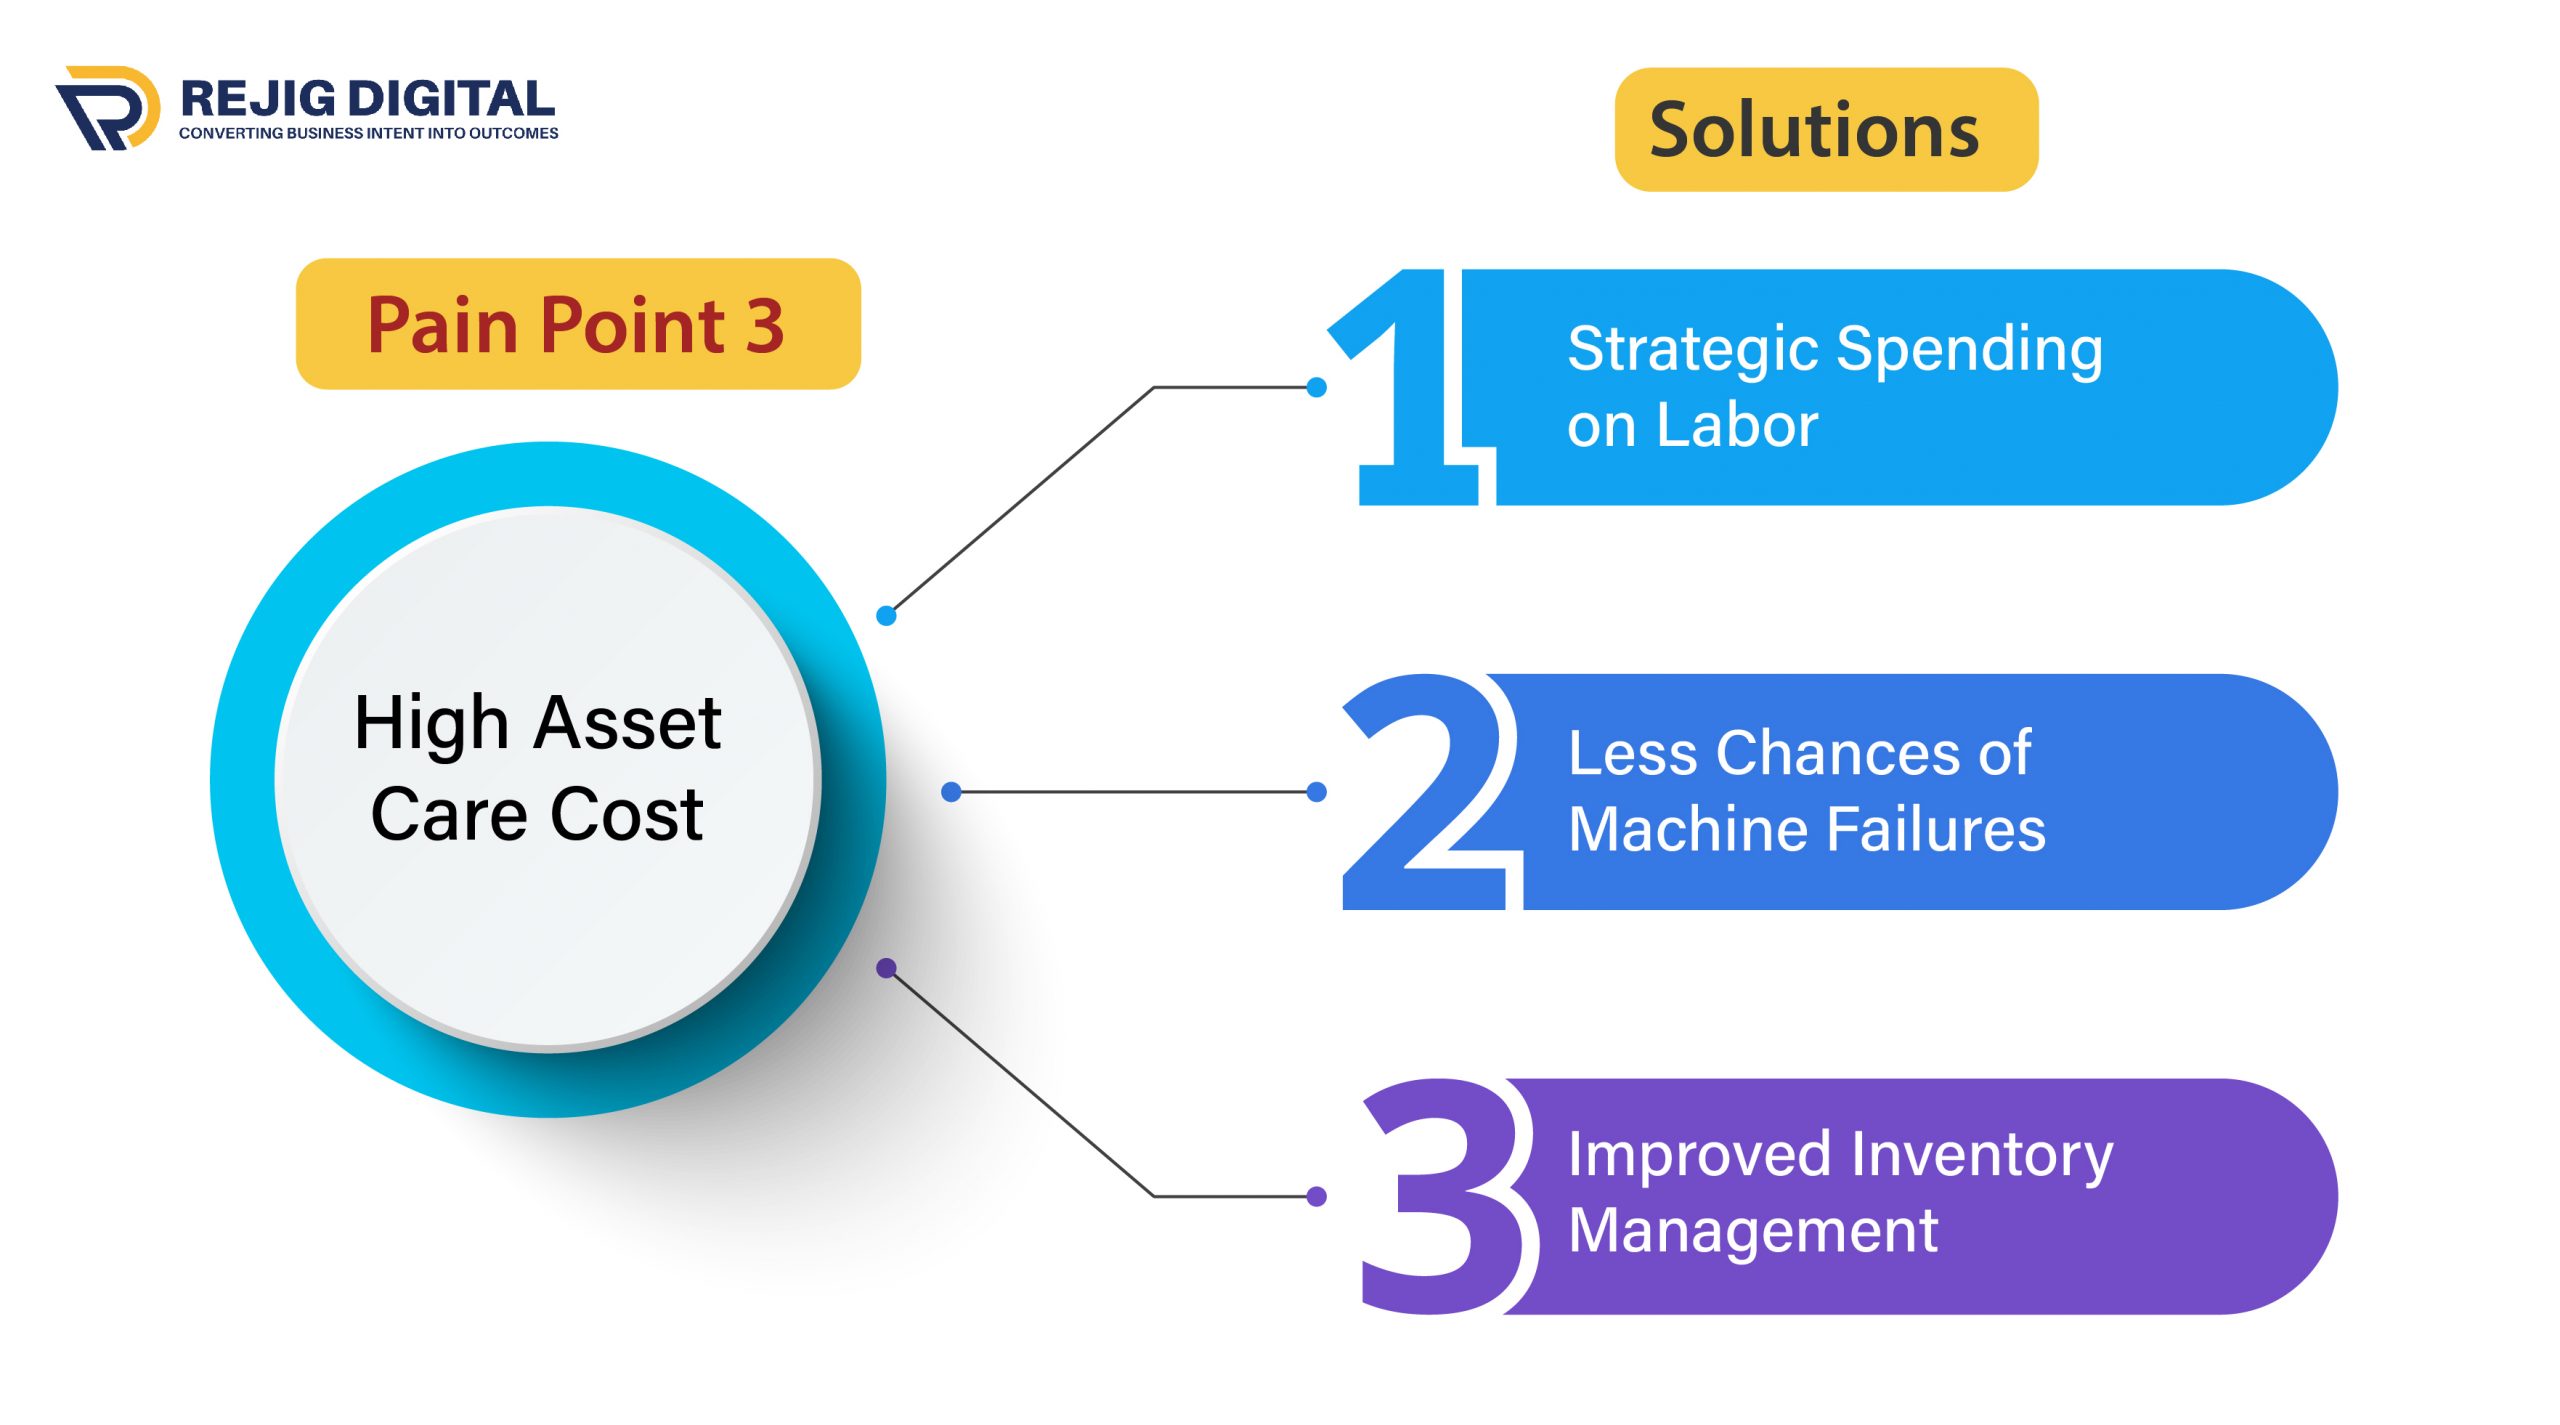 Pain Point 3: High Asset Care Cost